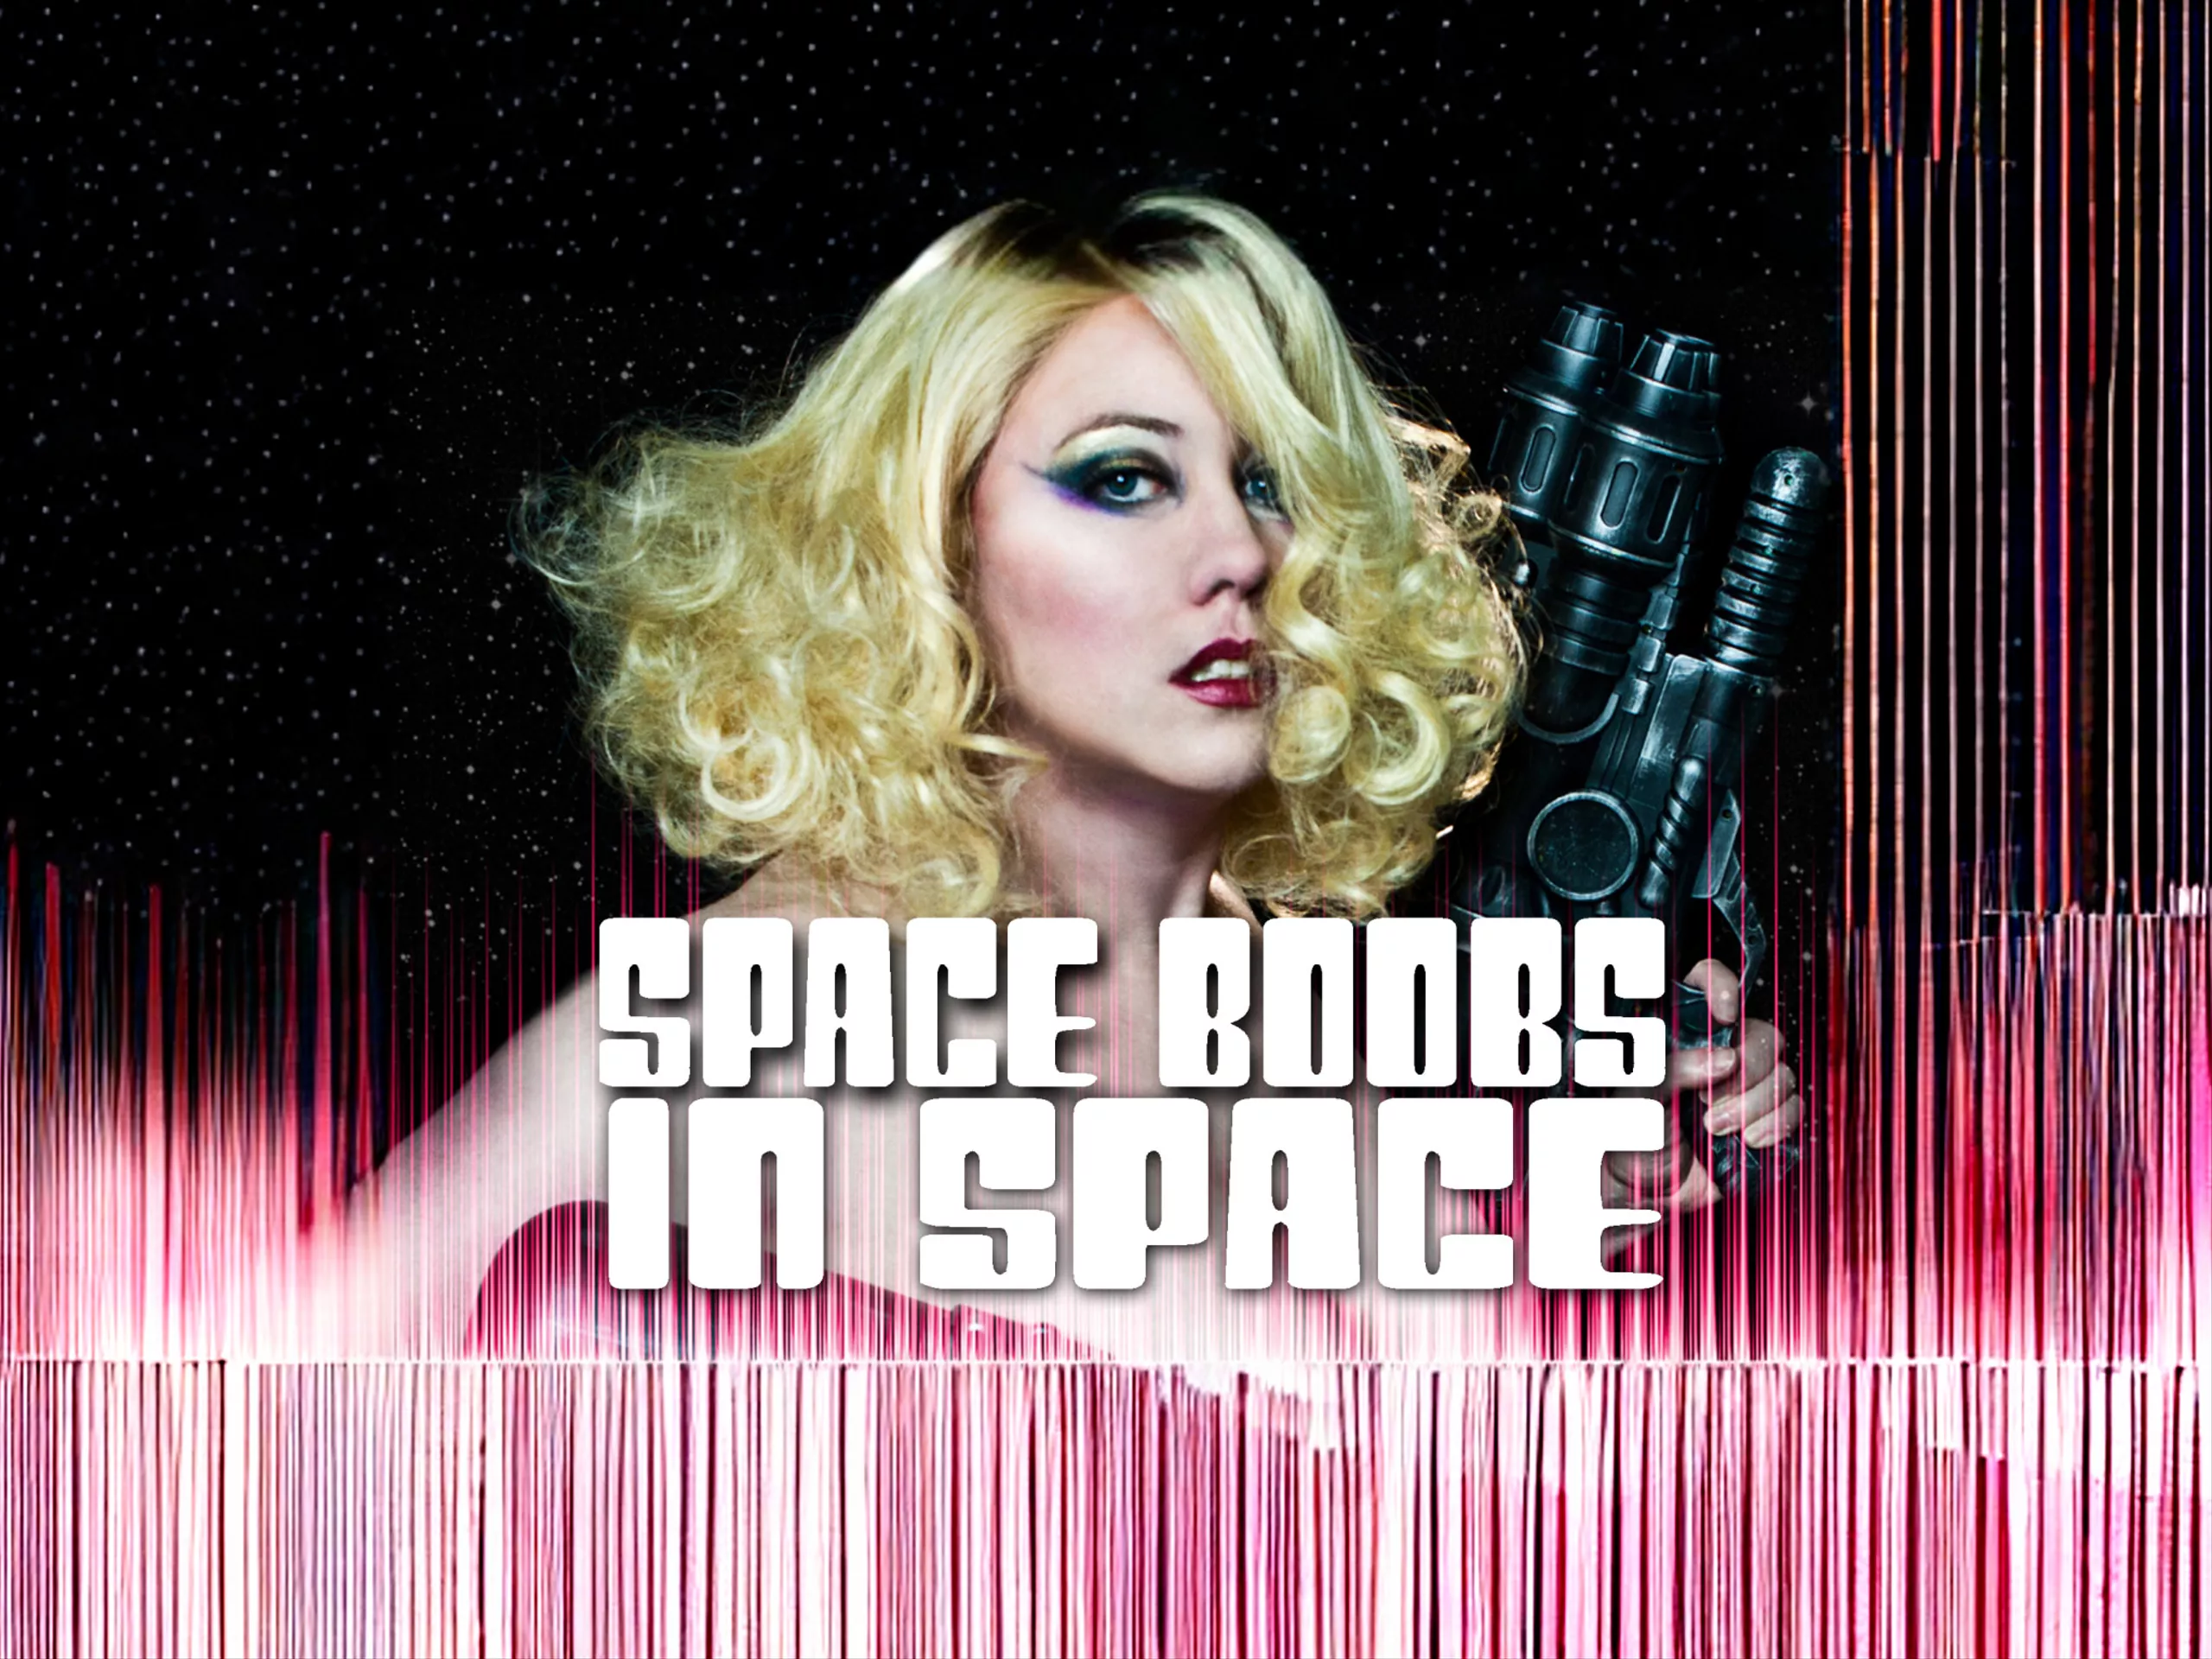 Space Boobs In Space is the best thing on Prime Video